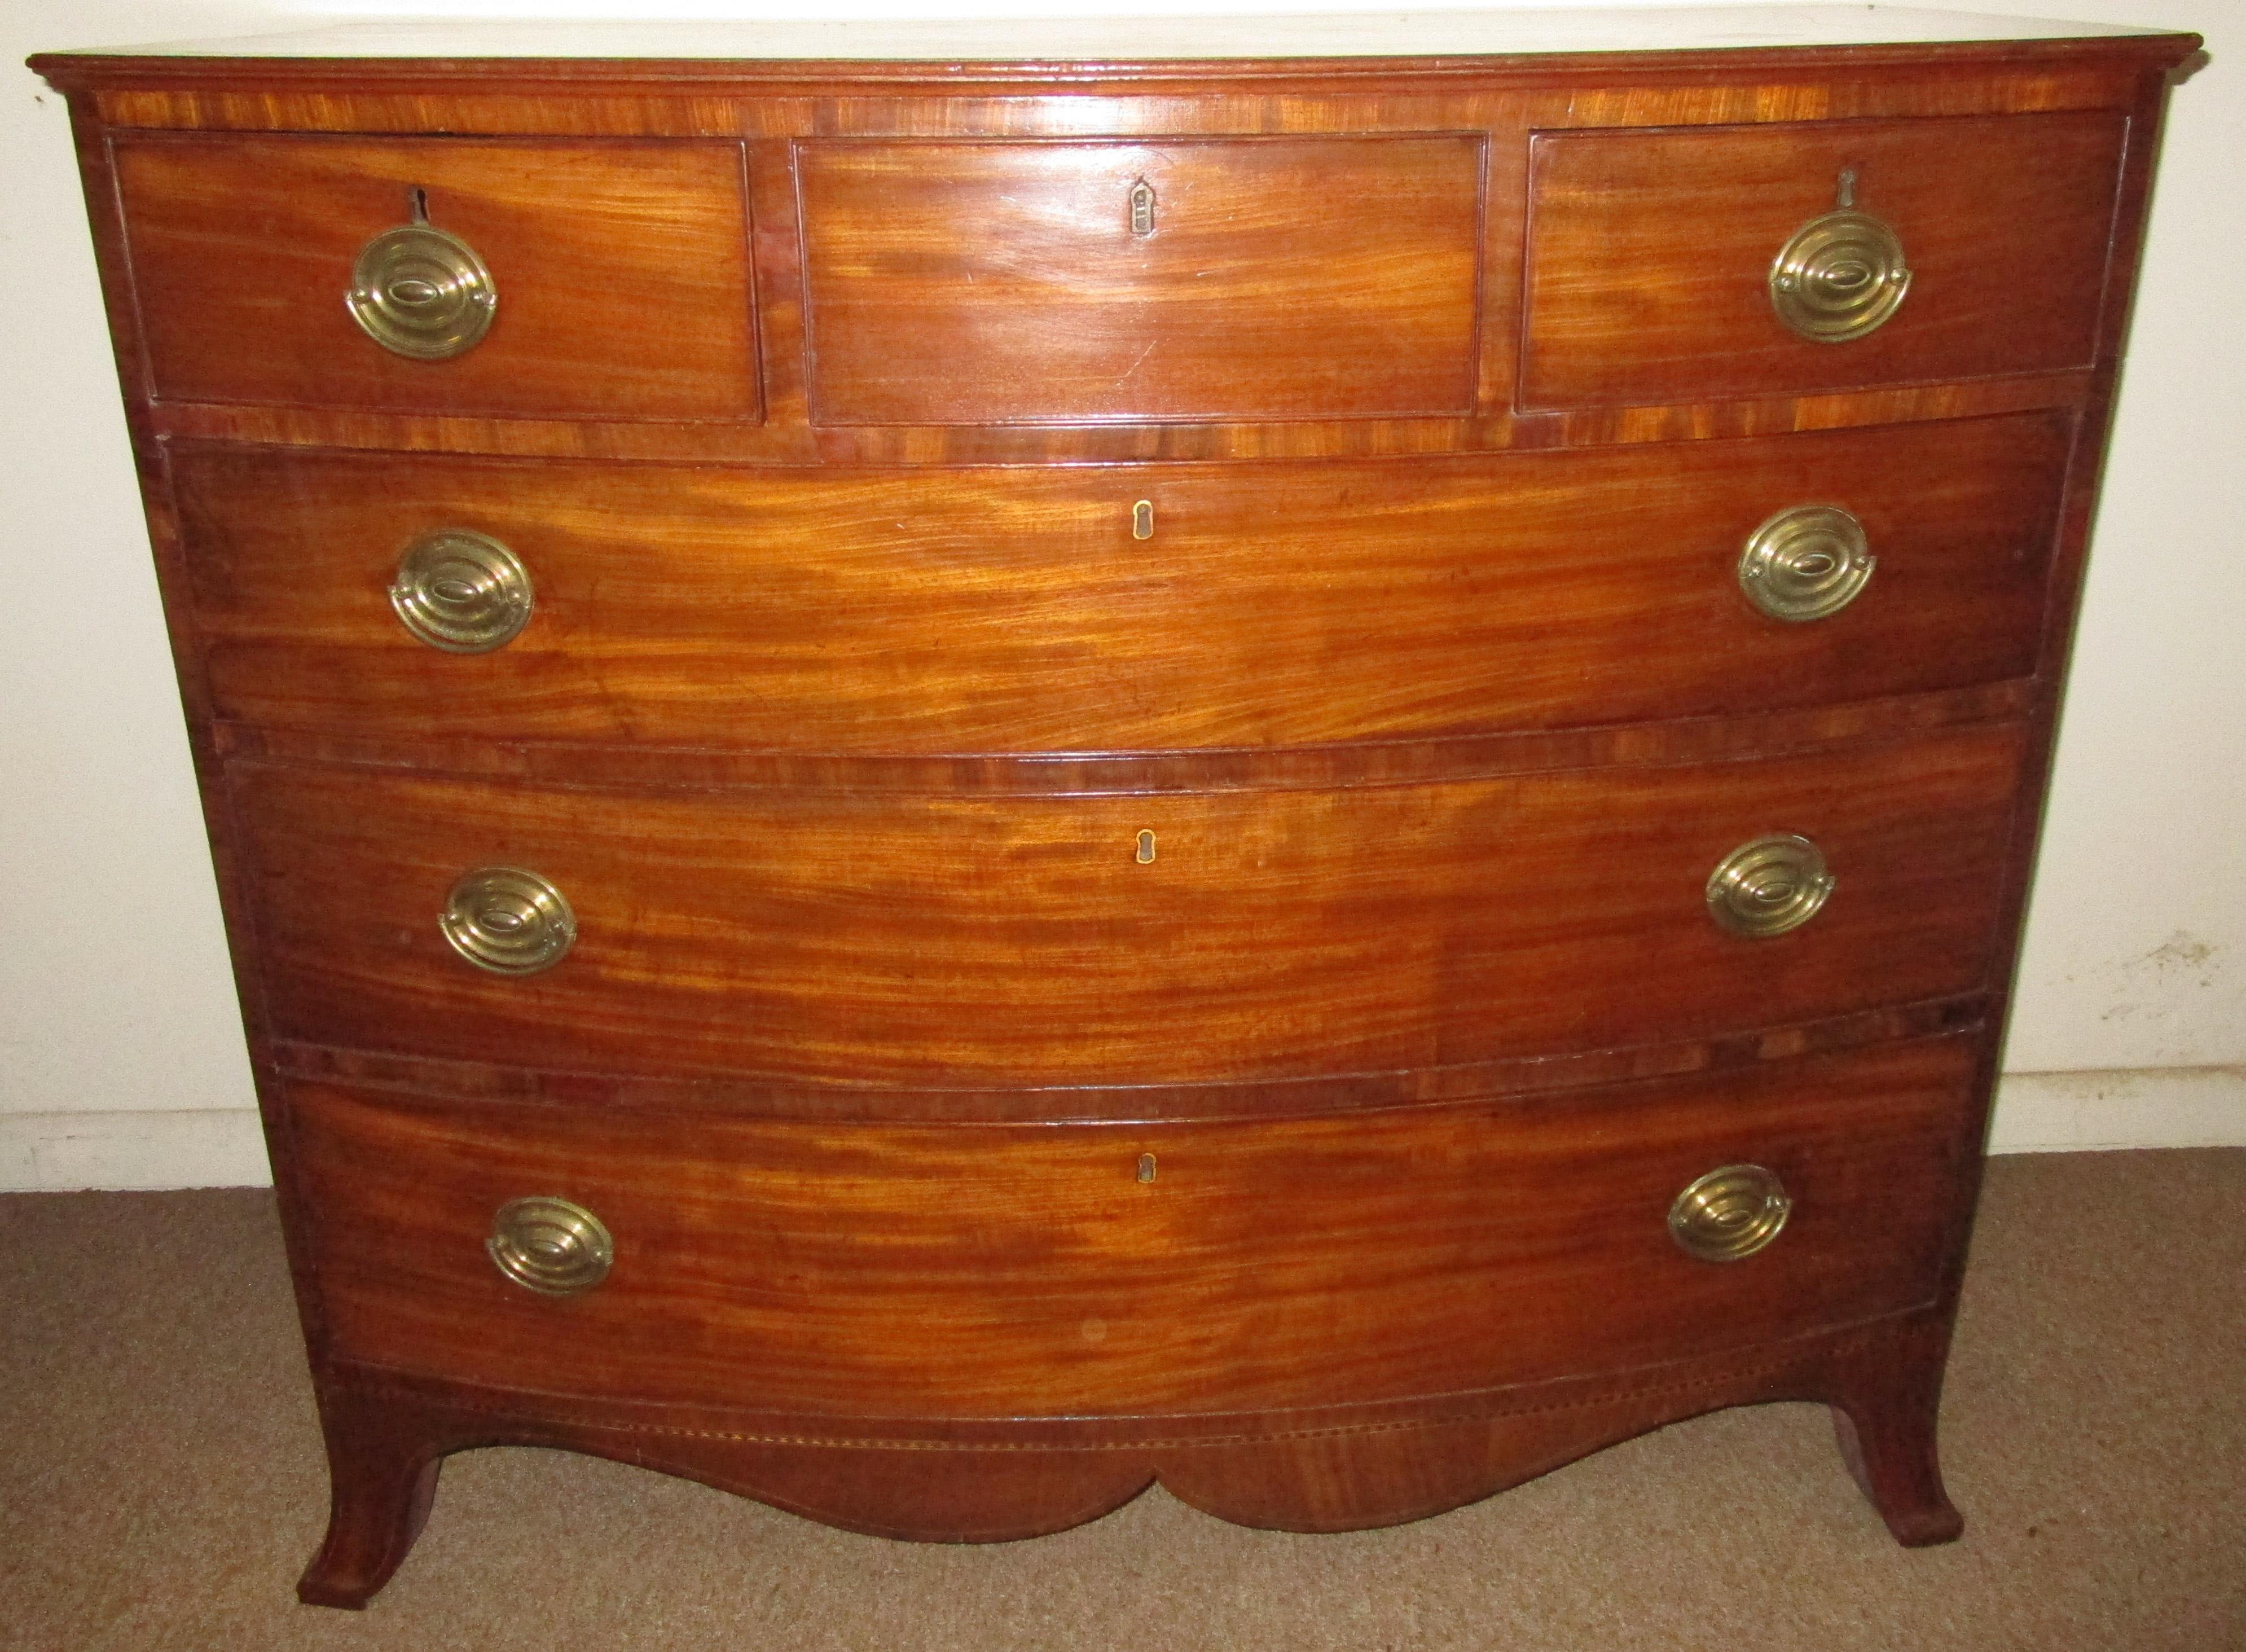 This handsome substantial sized Georgian mahogany bow front chest of drawers exhibits exceptional color and grain, with fine and accommodating proportions. Features include three short drawers, above three tiers of full width drawers, all fitted